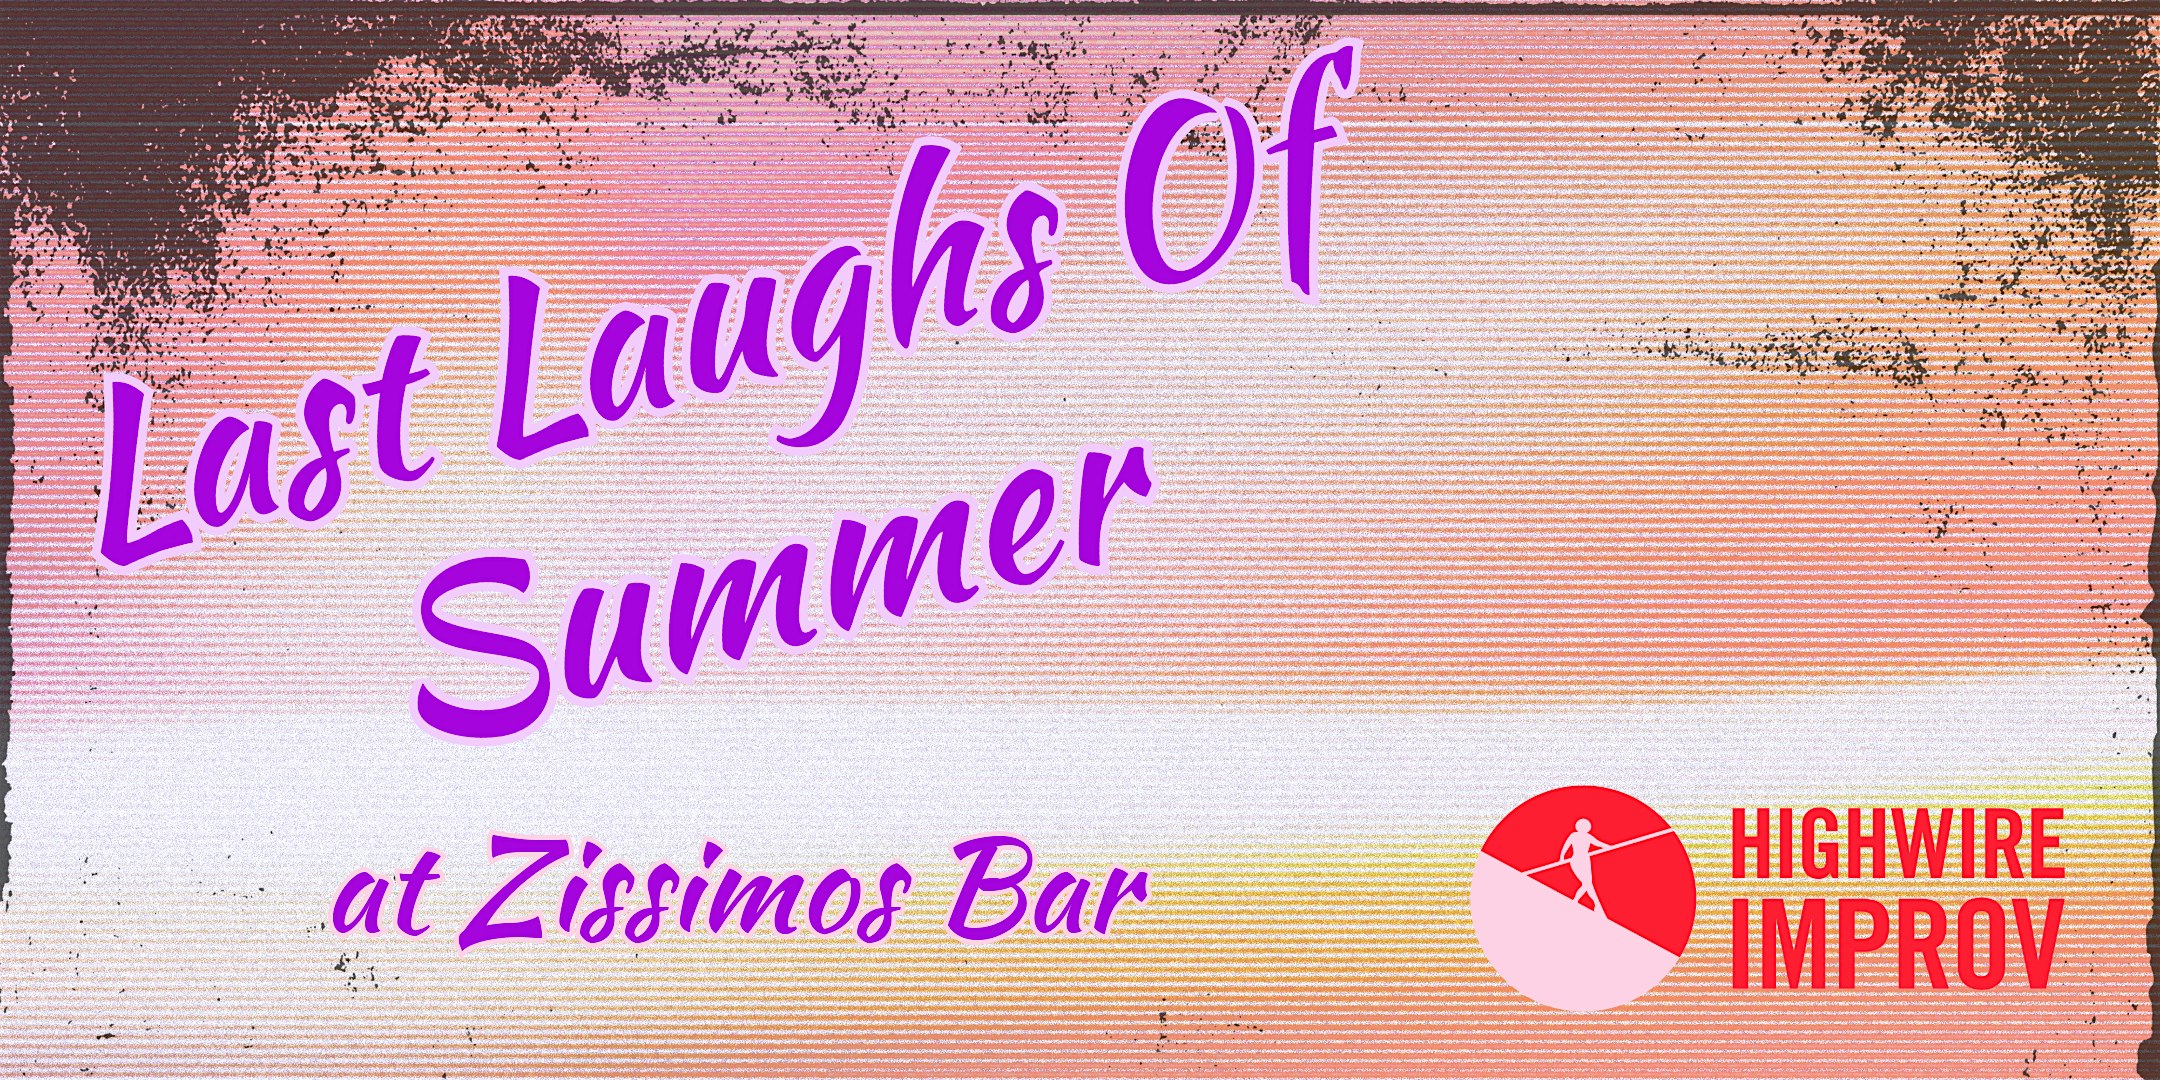 The Last Laughs of Summer at Zissimos Bar!